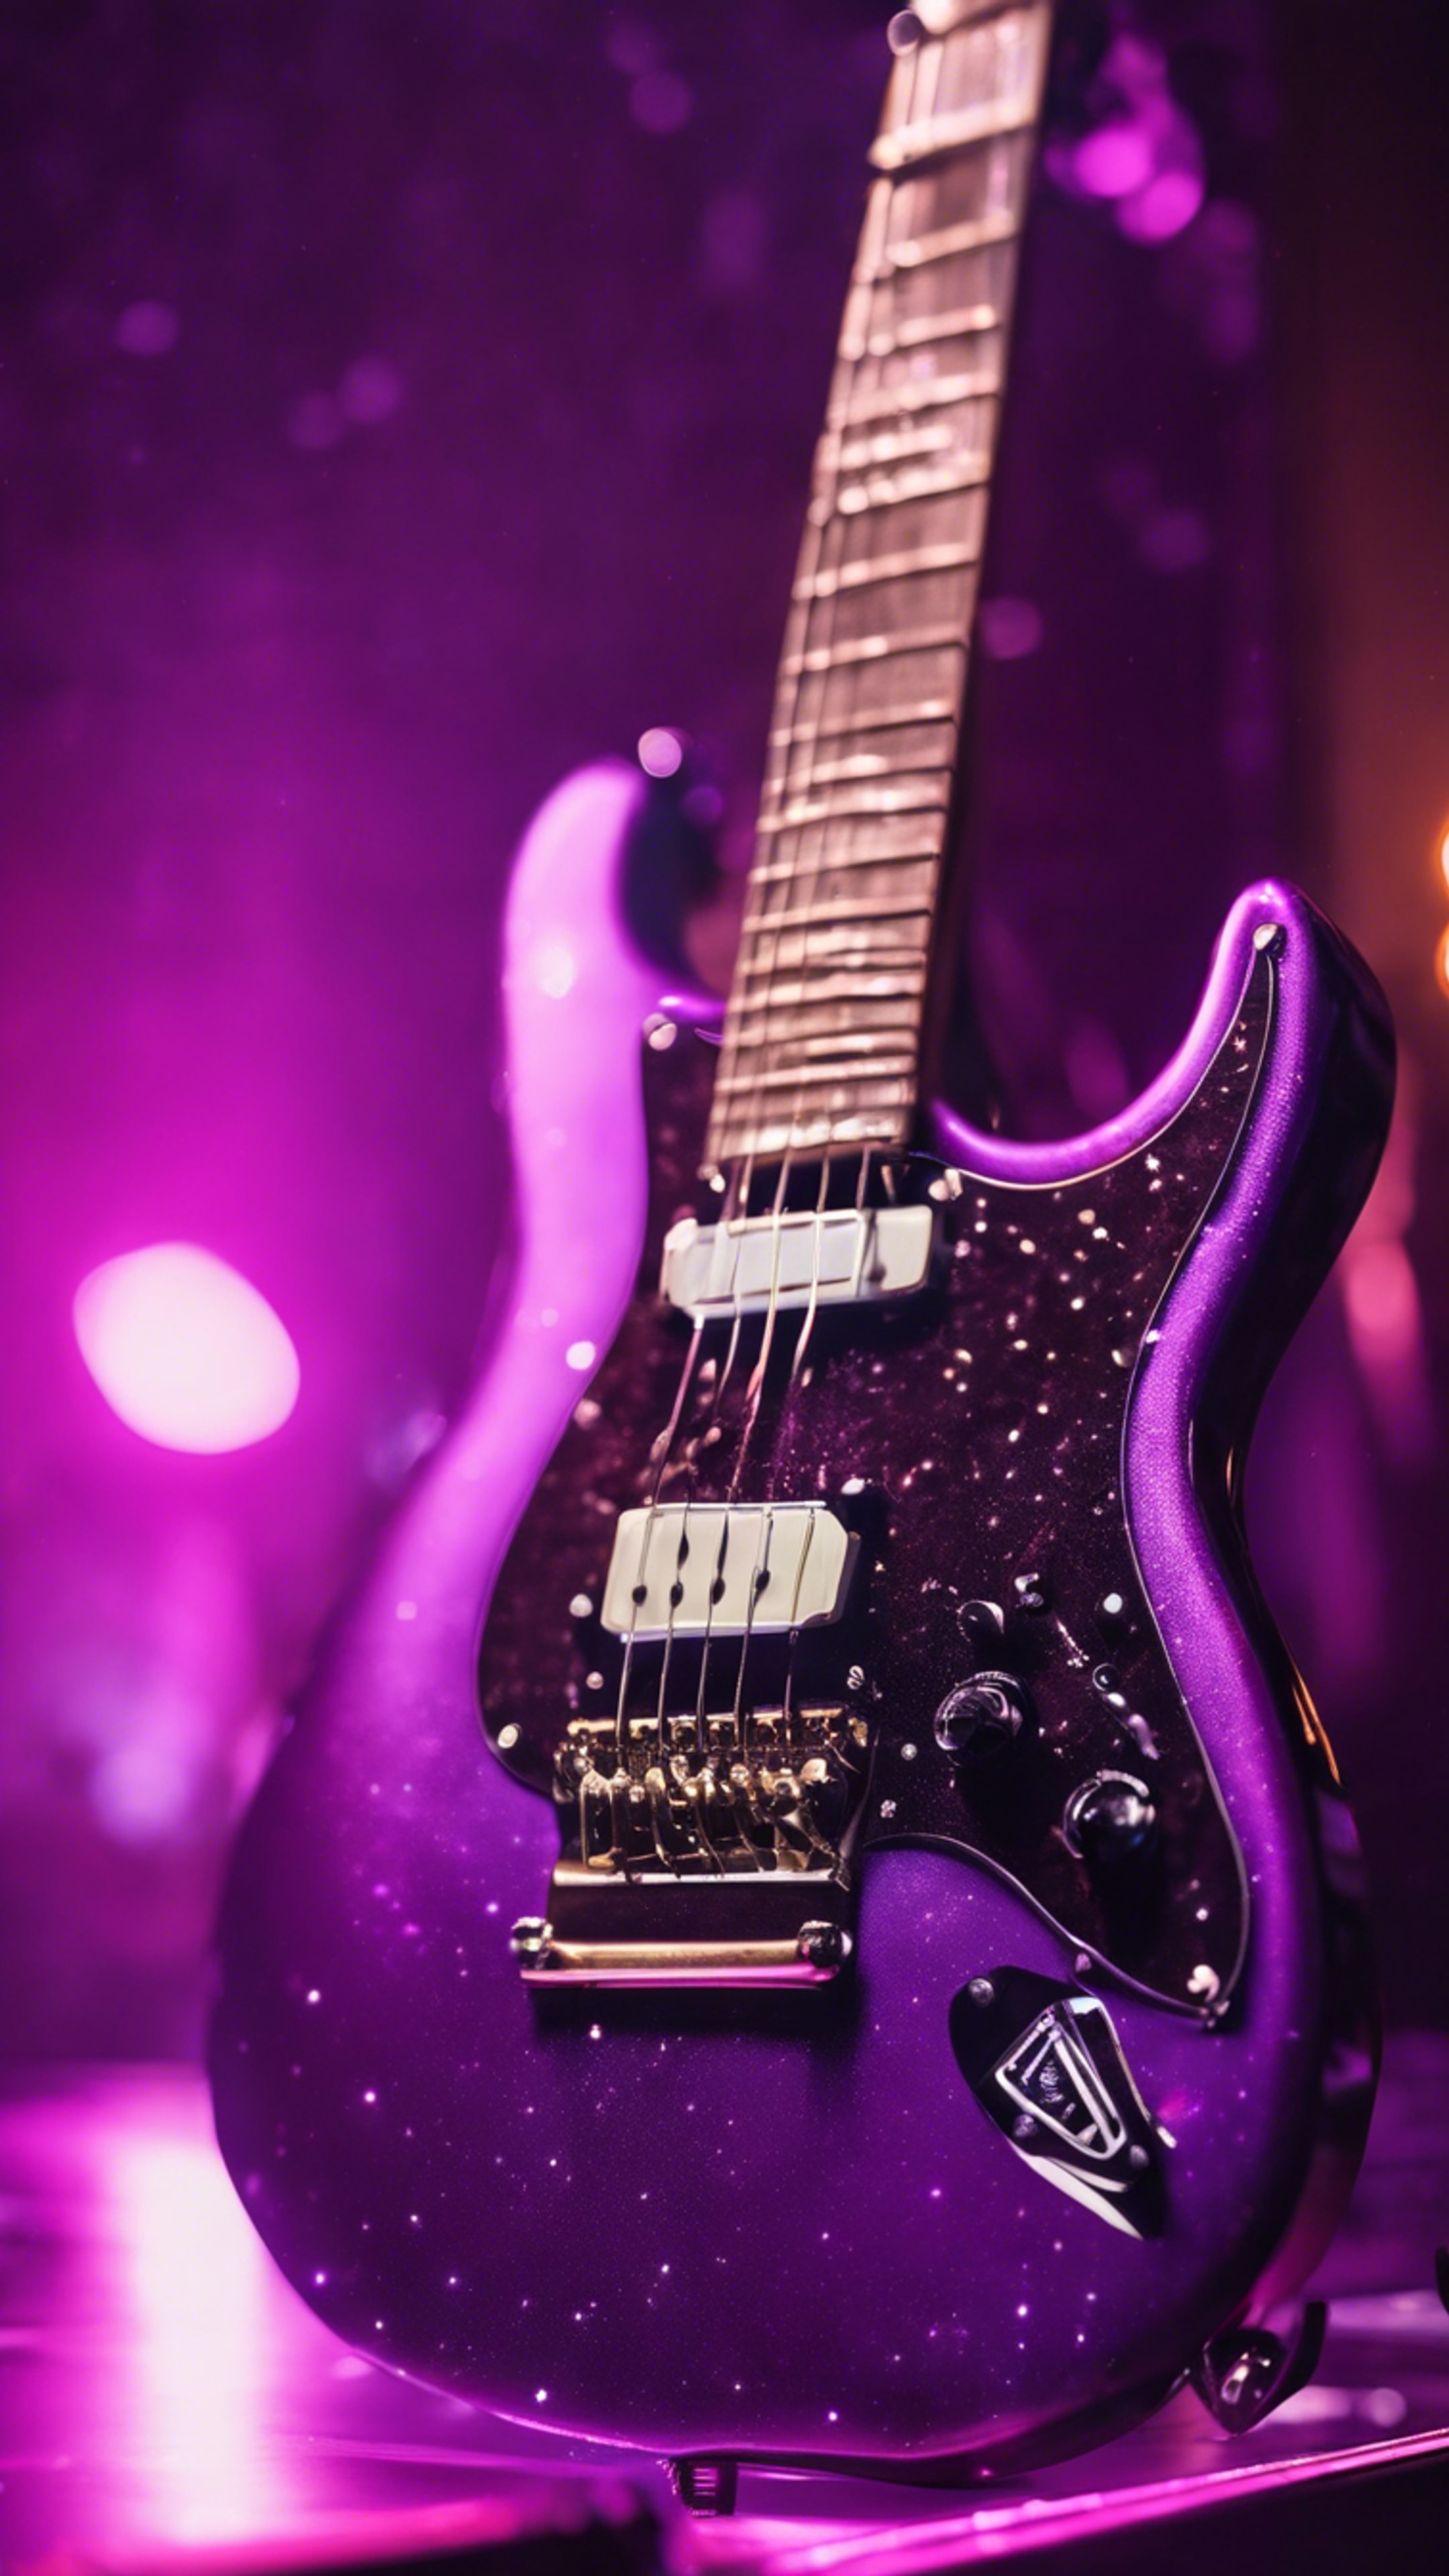 An electric guitar, finished in a glossy neon purple, under the cool stage lights of a concert.壁紙[e32ffa723fc740a5910d]